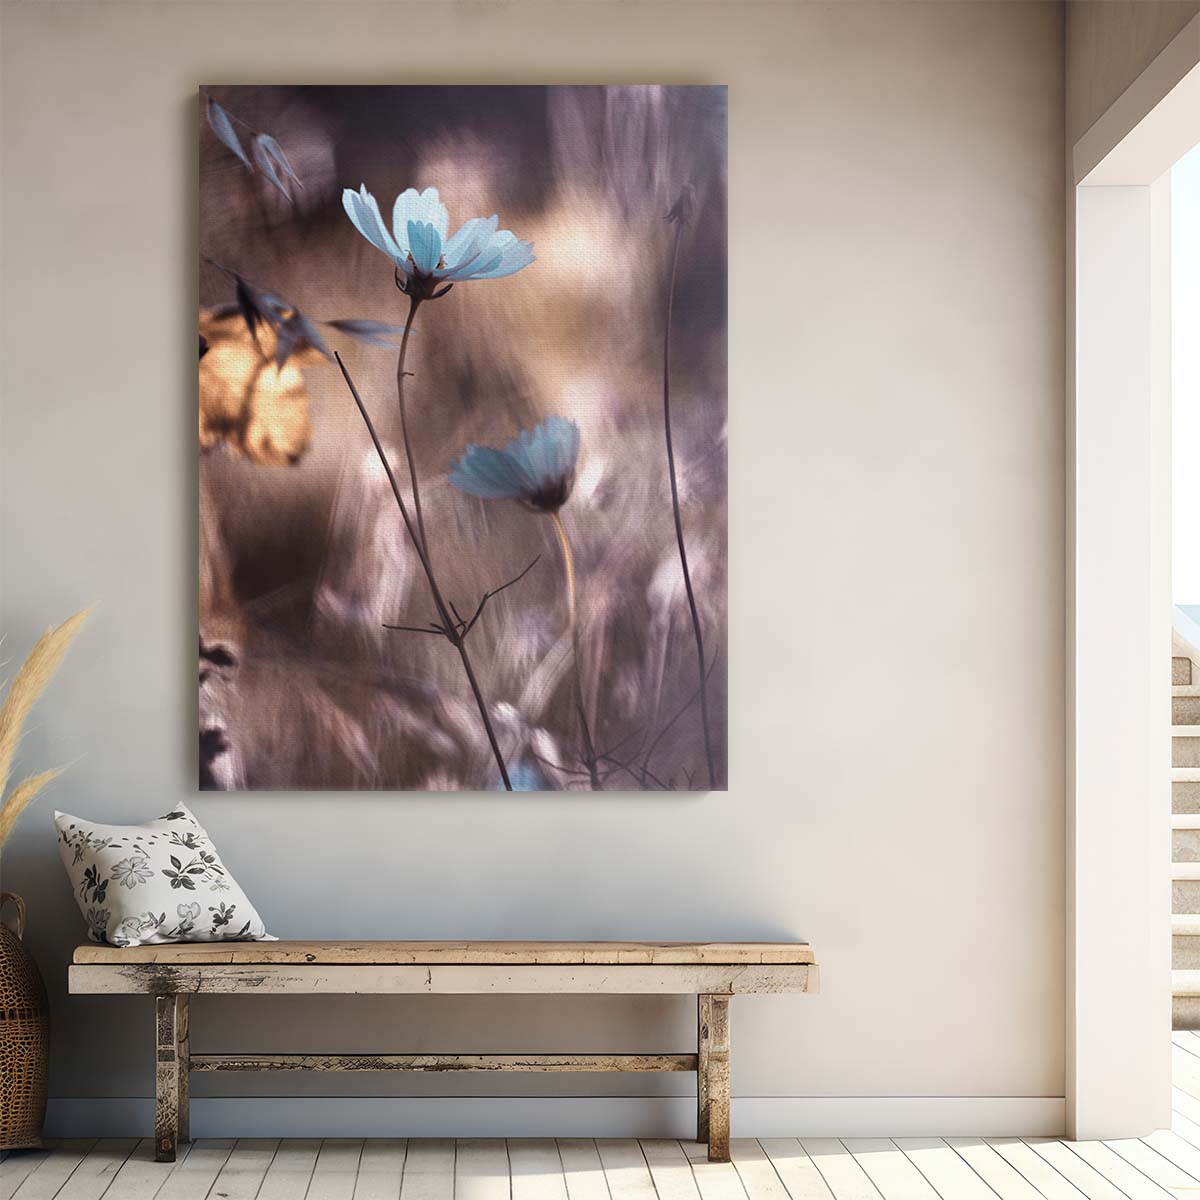 Delicate Blue Autumn Flower Macro Photography Wall Art by Luxuriance Designs, made in USA